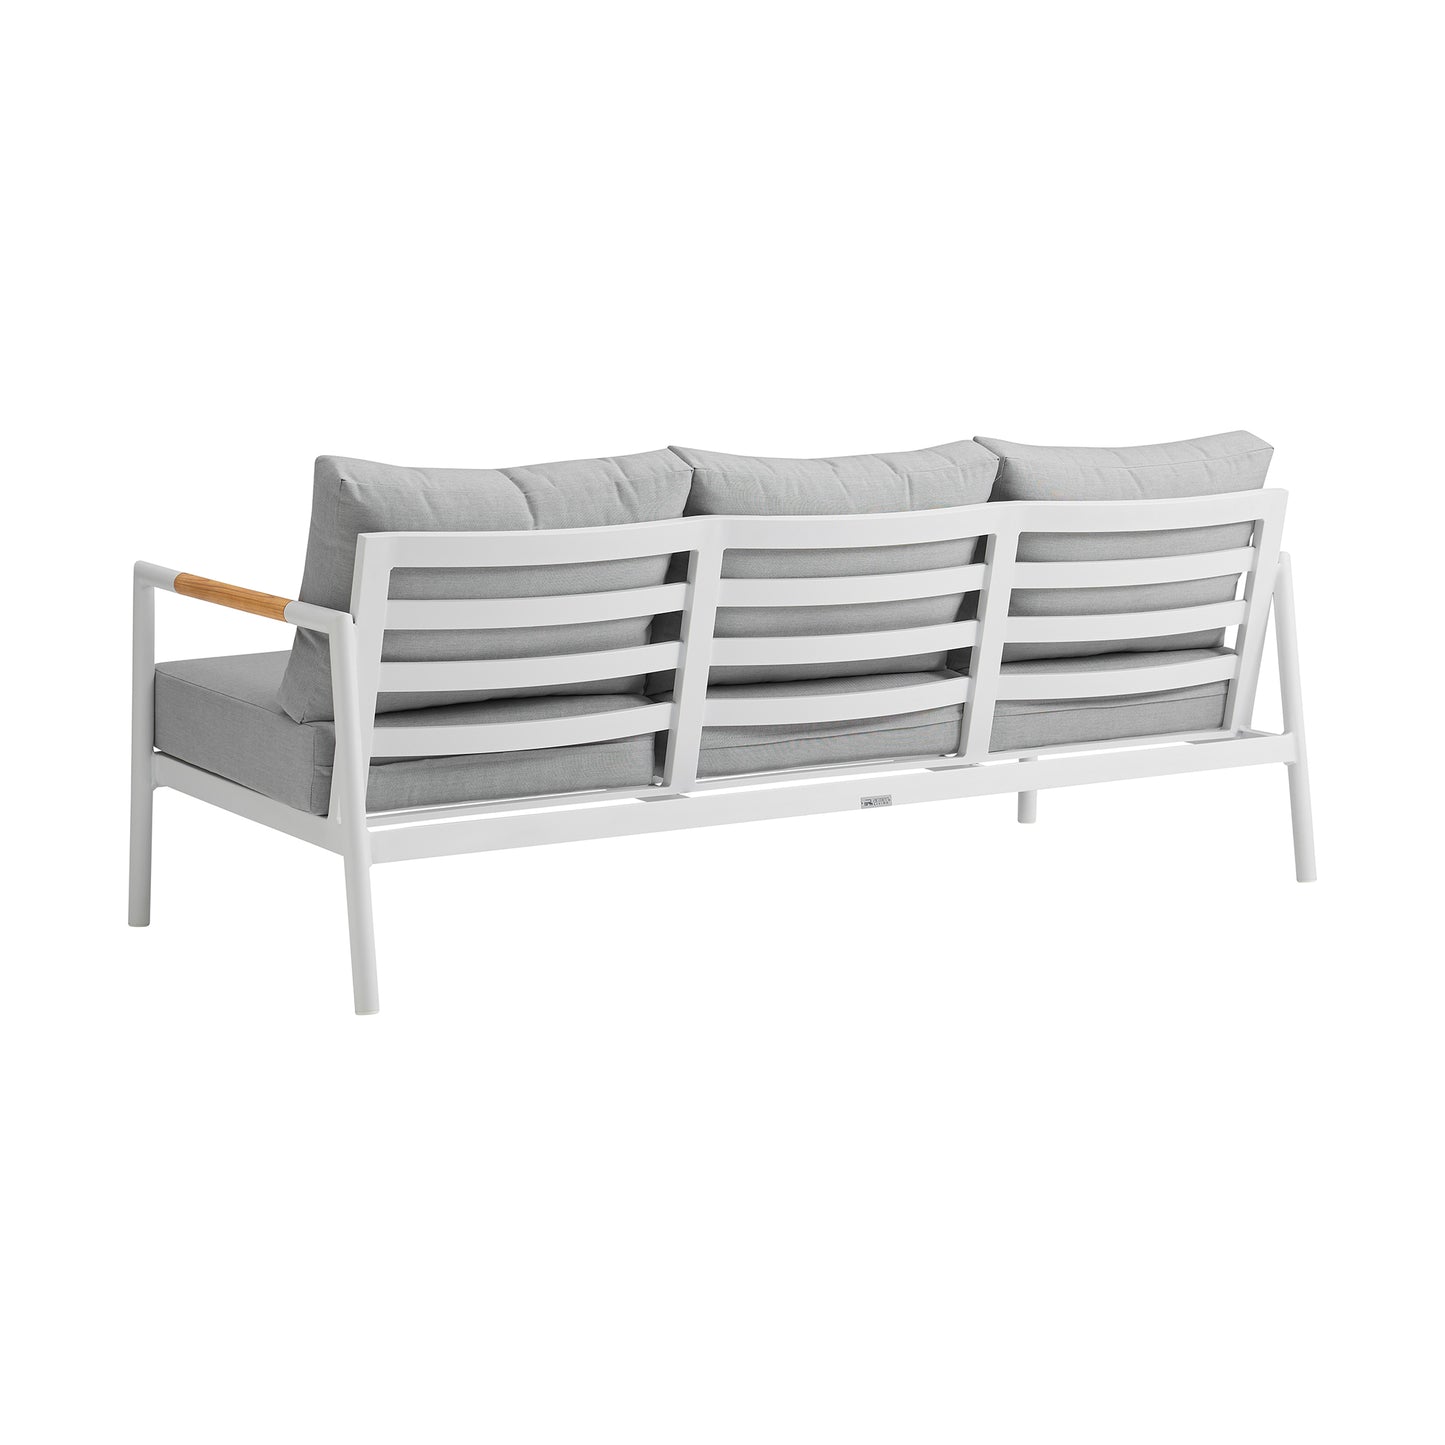 Crown 4 Piece White Aluminum and Teak Outdoor Seating Set with Light Gray Cushions